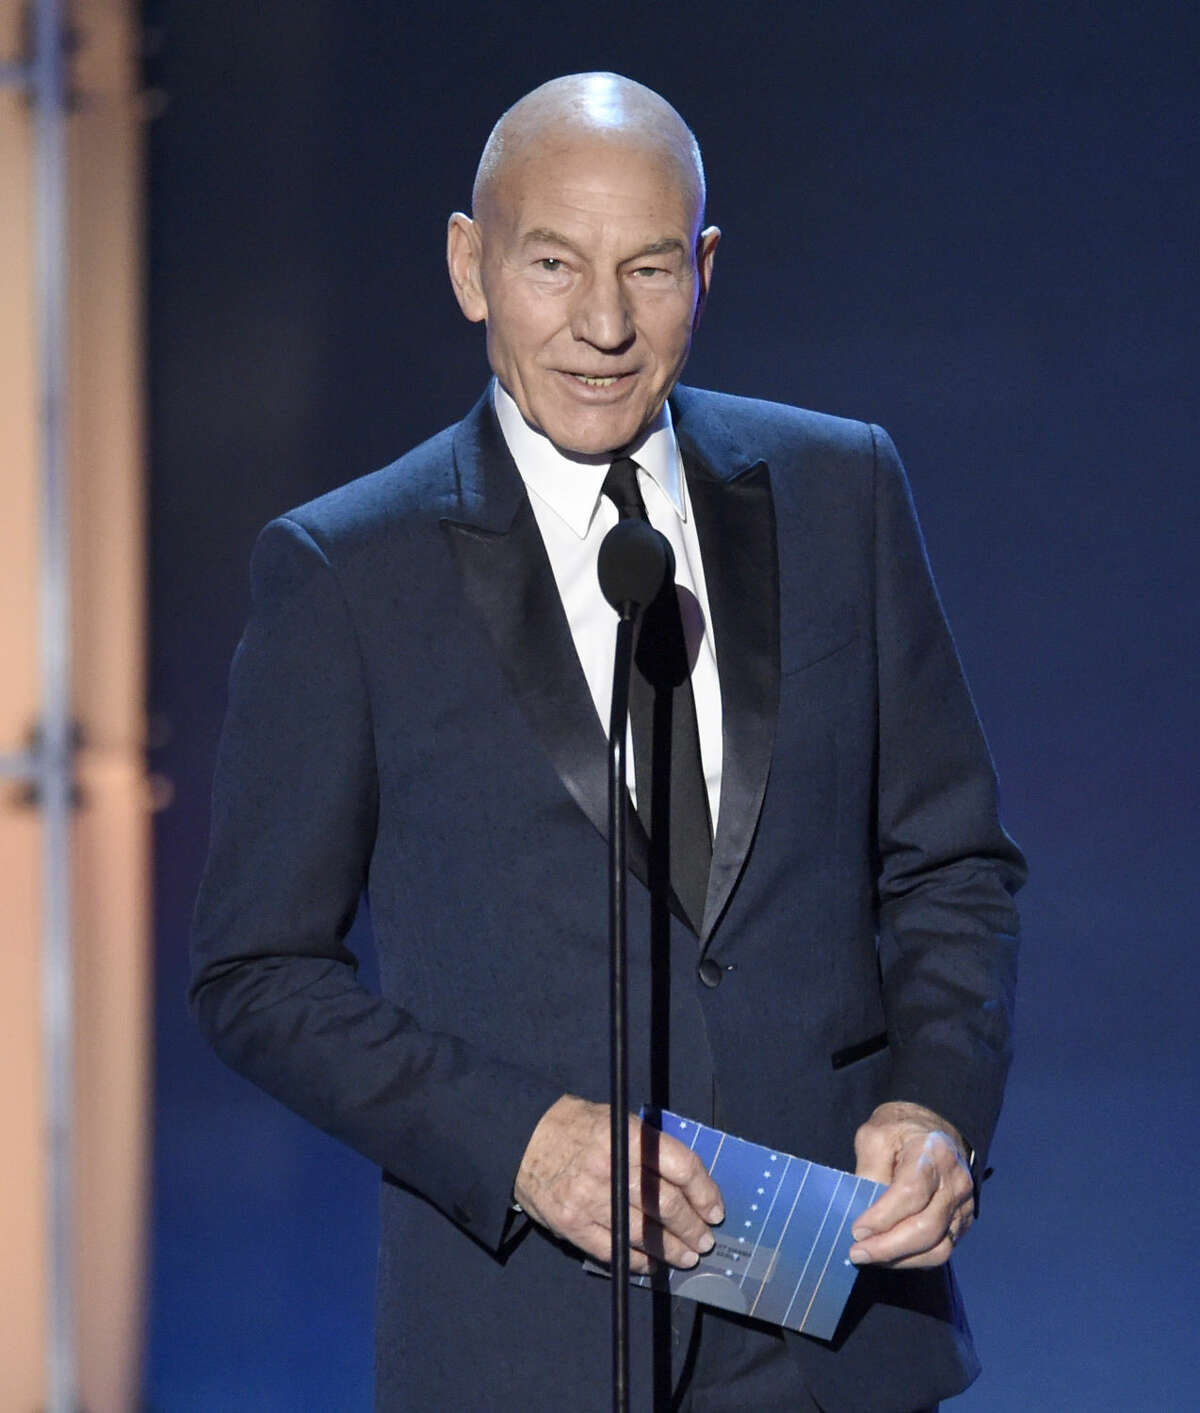 Sir Patrick Stewart presents the award for best drama series at the 21st annual Critics' Choice Awards at the Barker Hangar on Sunday, Jan. 17, 2016, in Santa Monica, Calif. (Photo by Chris Pizzello/Invision/AP)